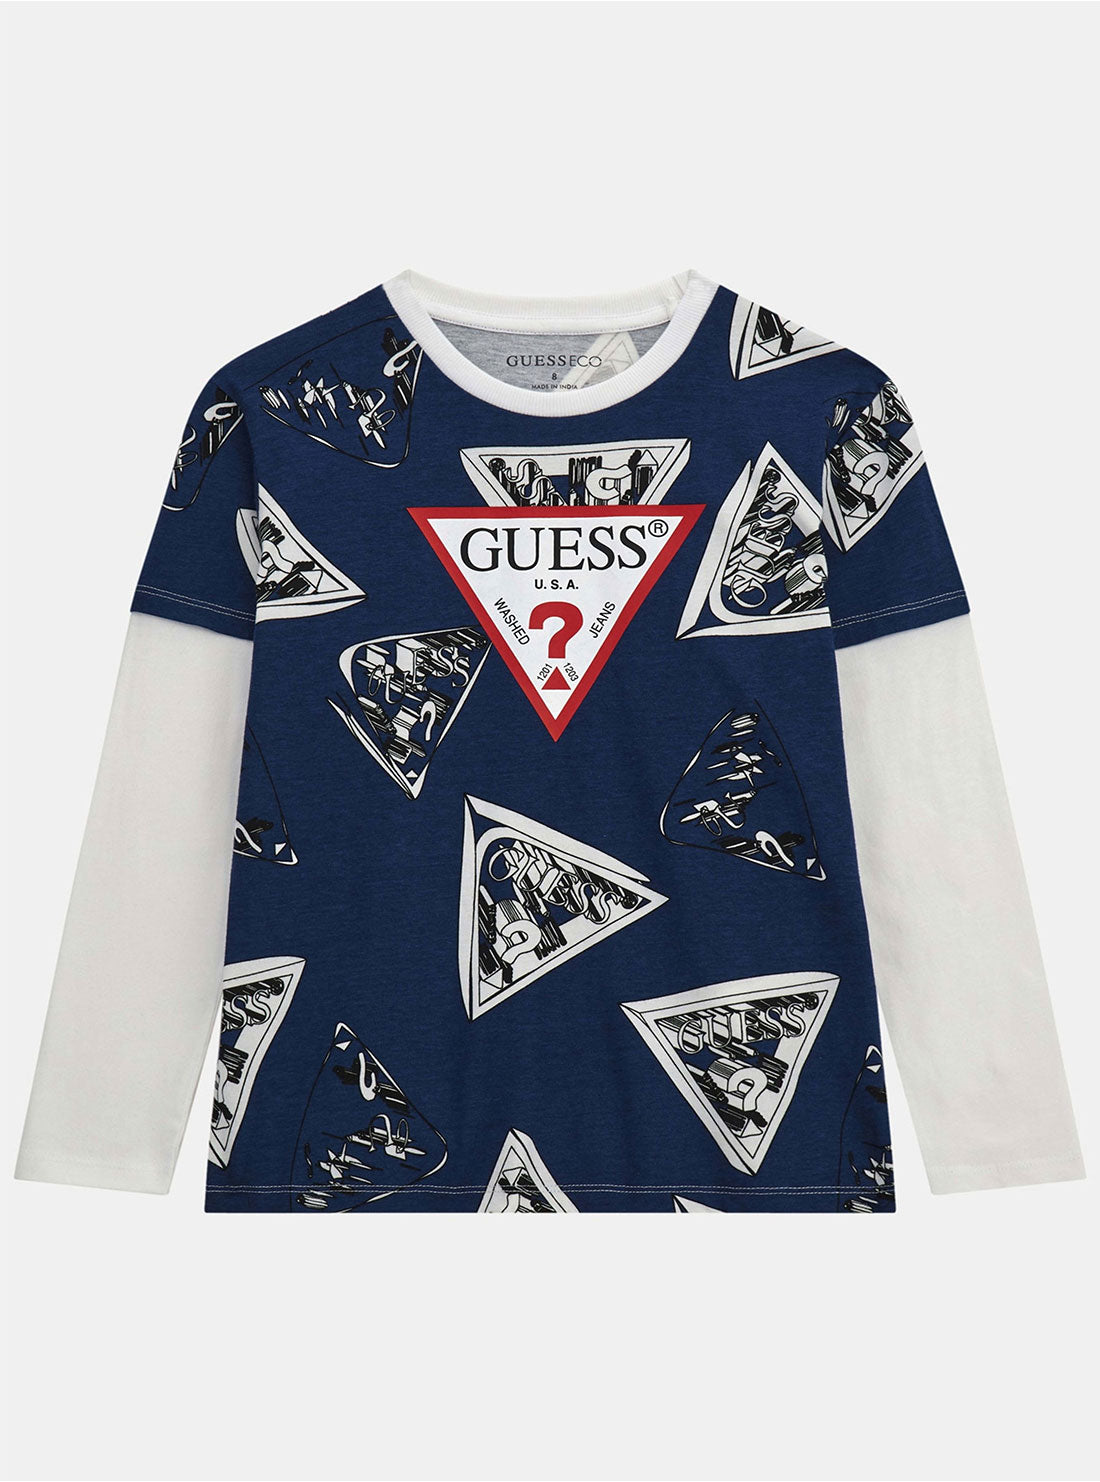 GUESS Blue Multi Print Long Sleeve T-Shirt (7-16) front view